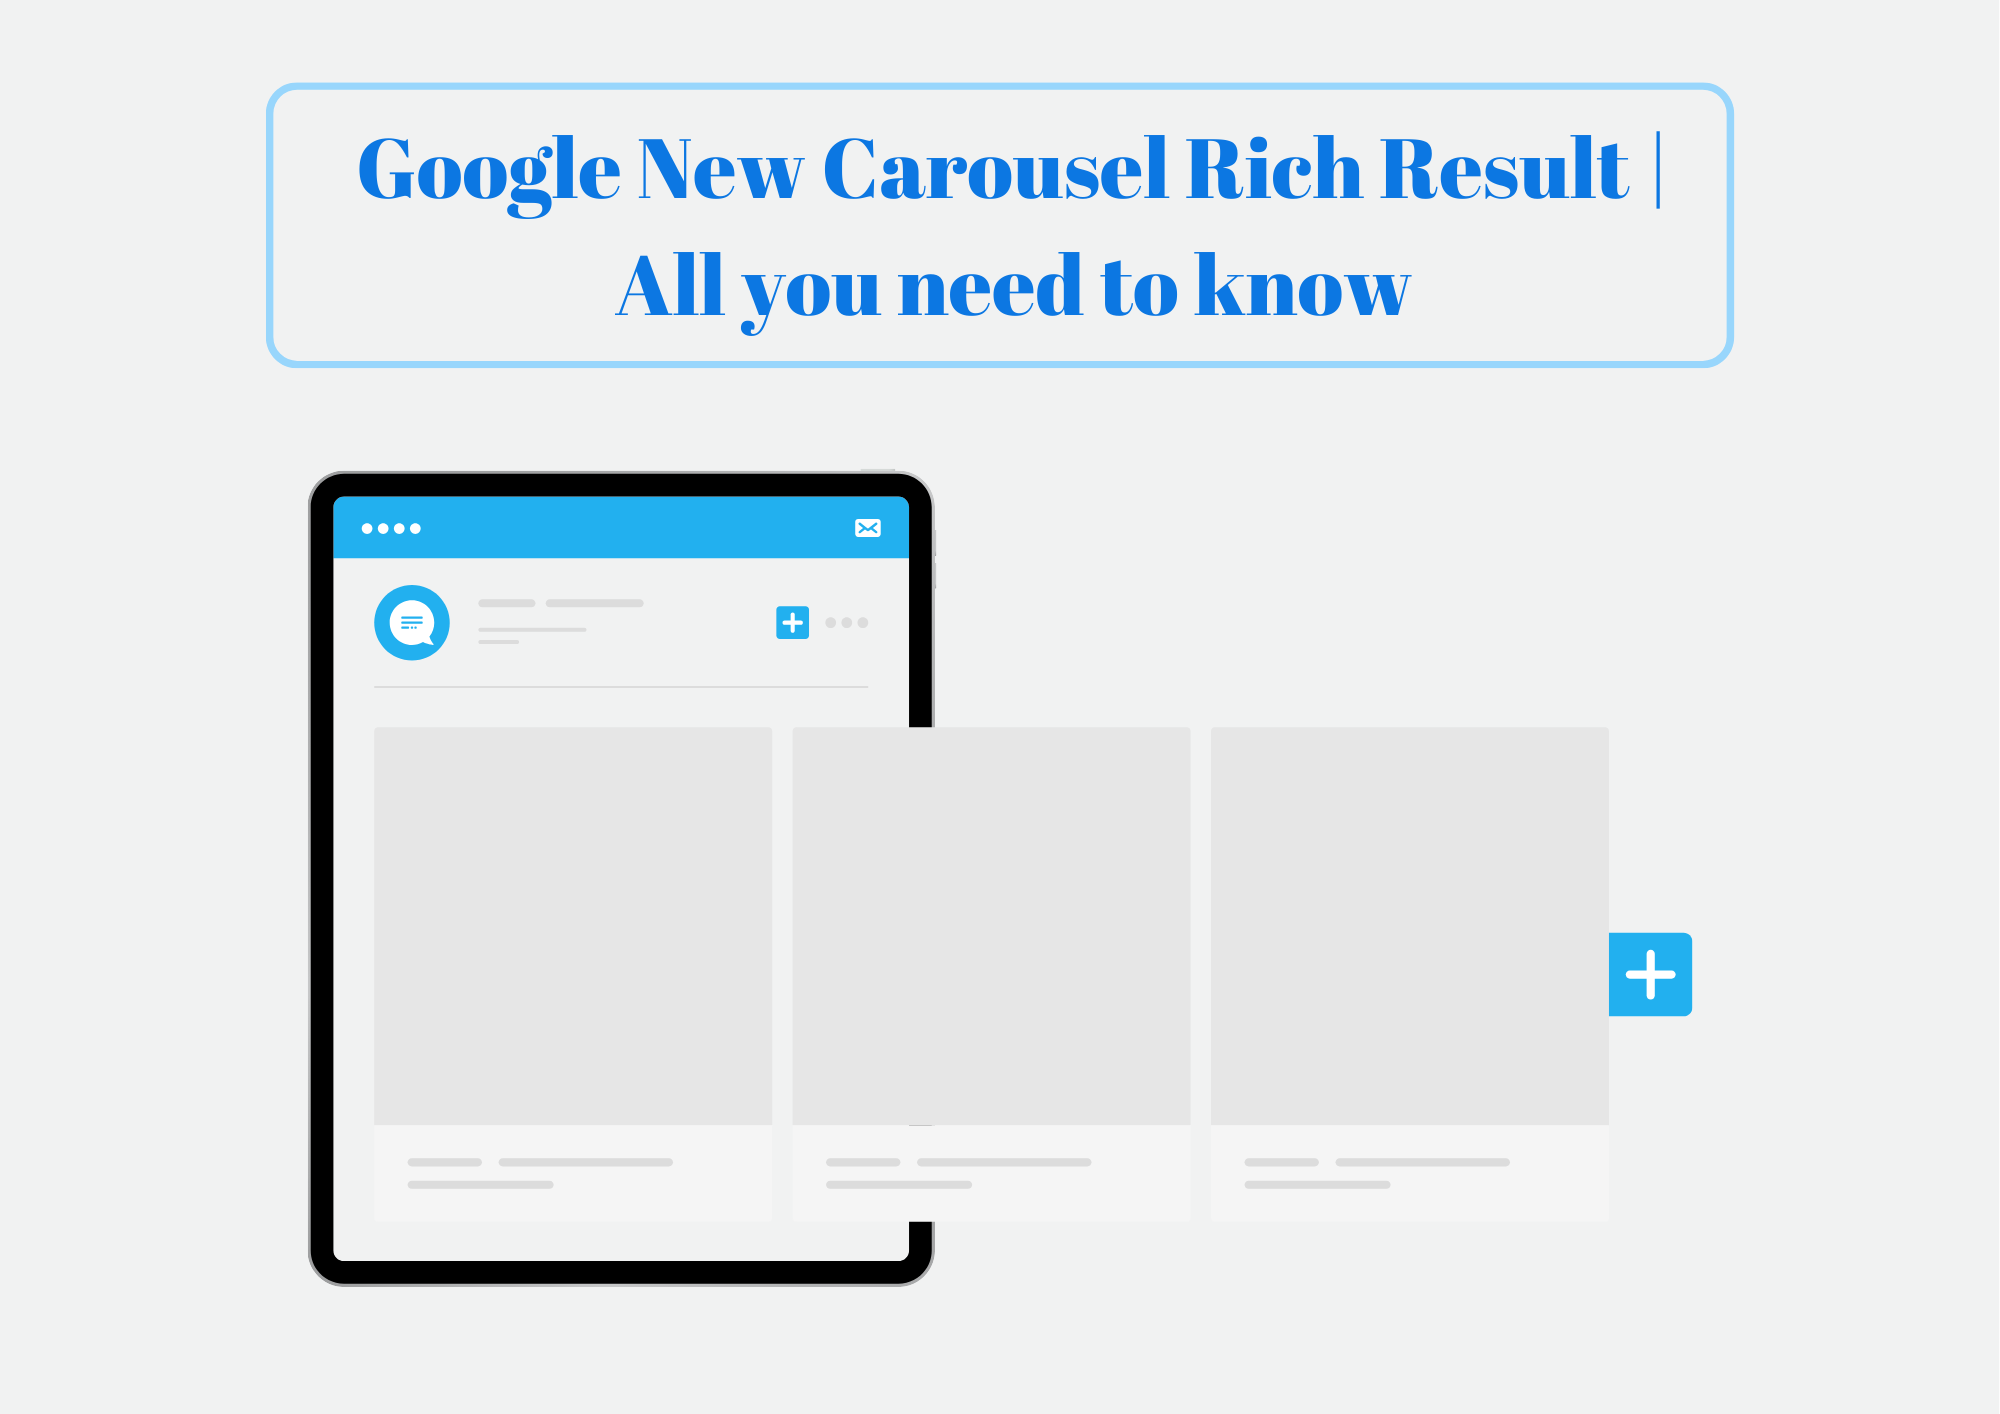 Google New Carousel Rich Result All you need to know